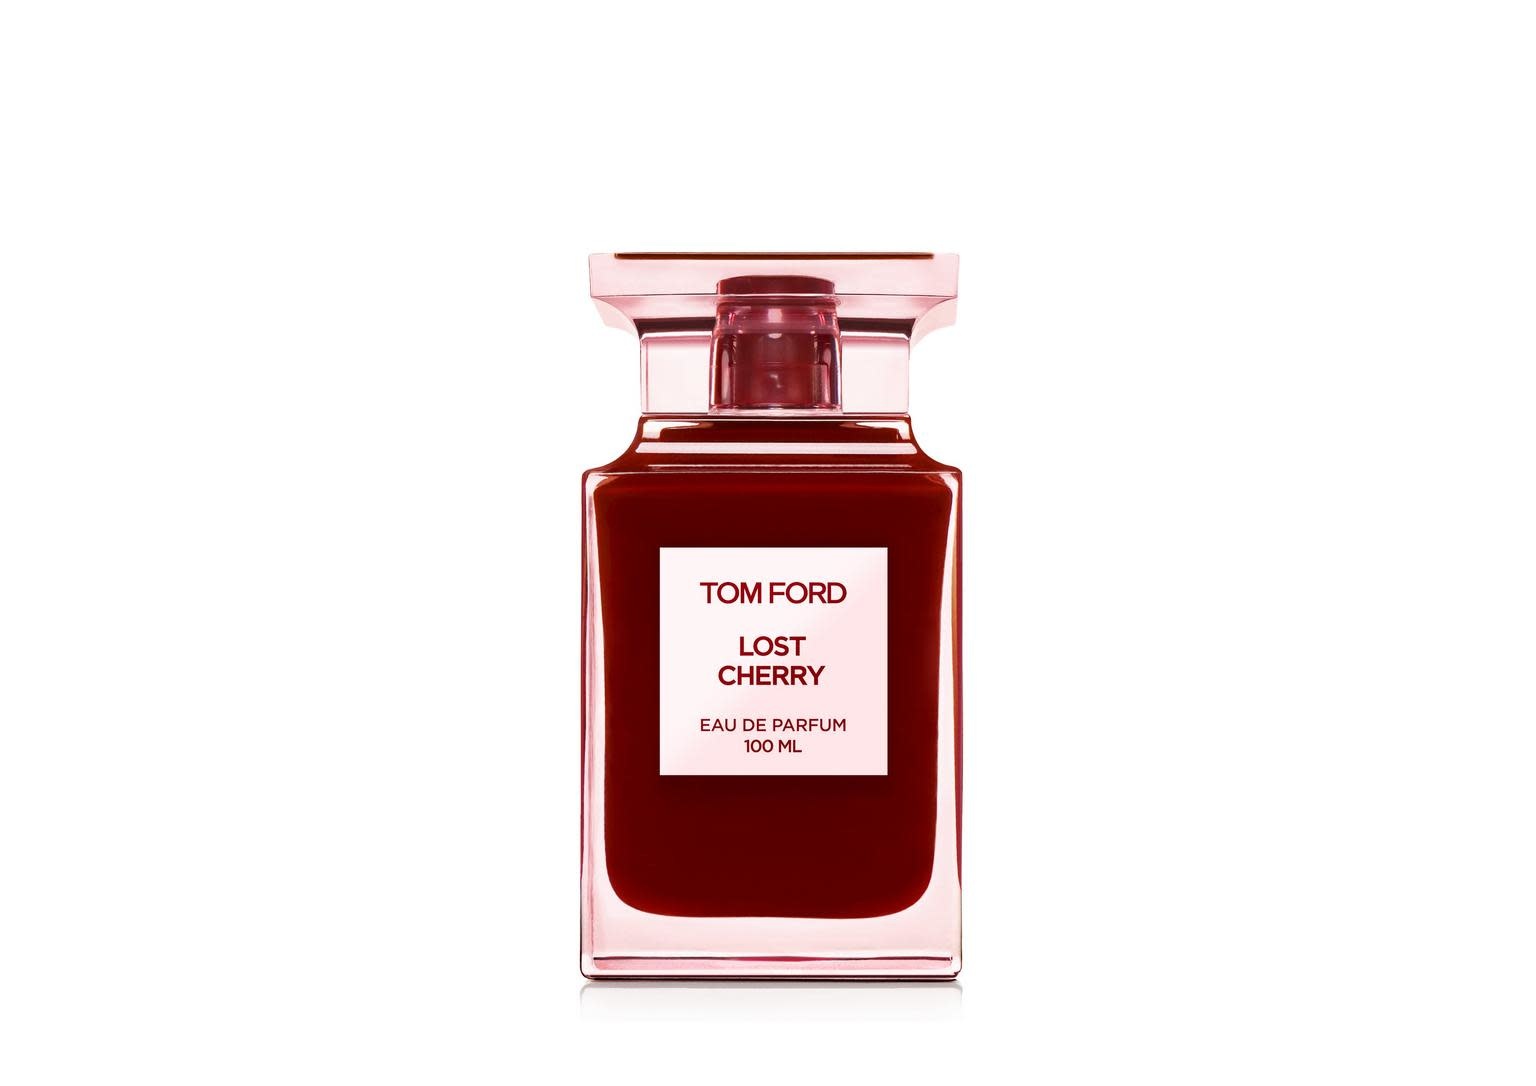 Tom Ford - Lost Cherry EdP 100ml - The Scent Masters